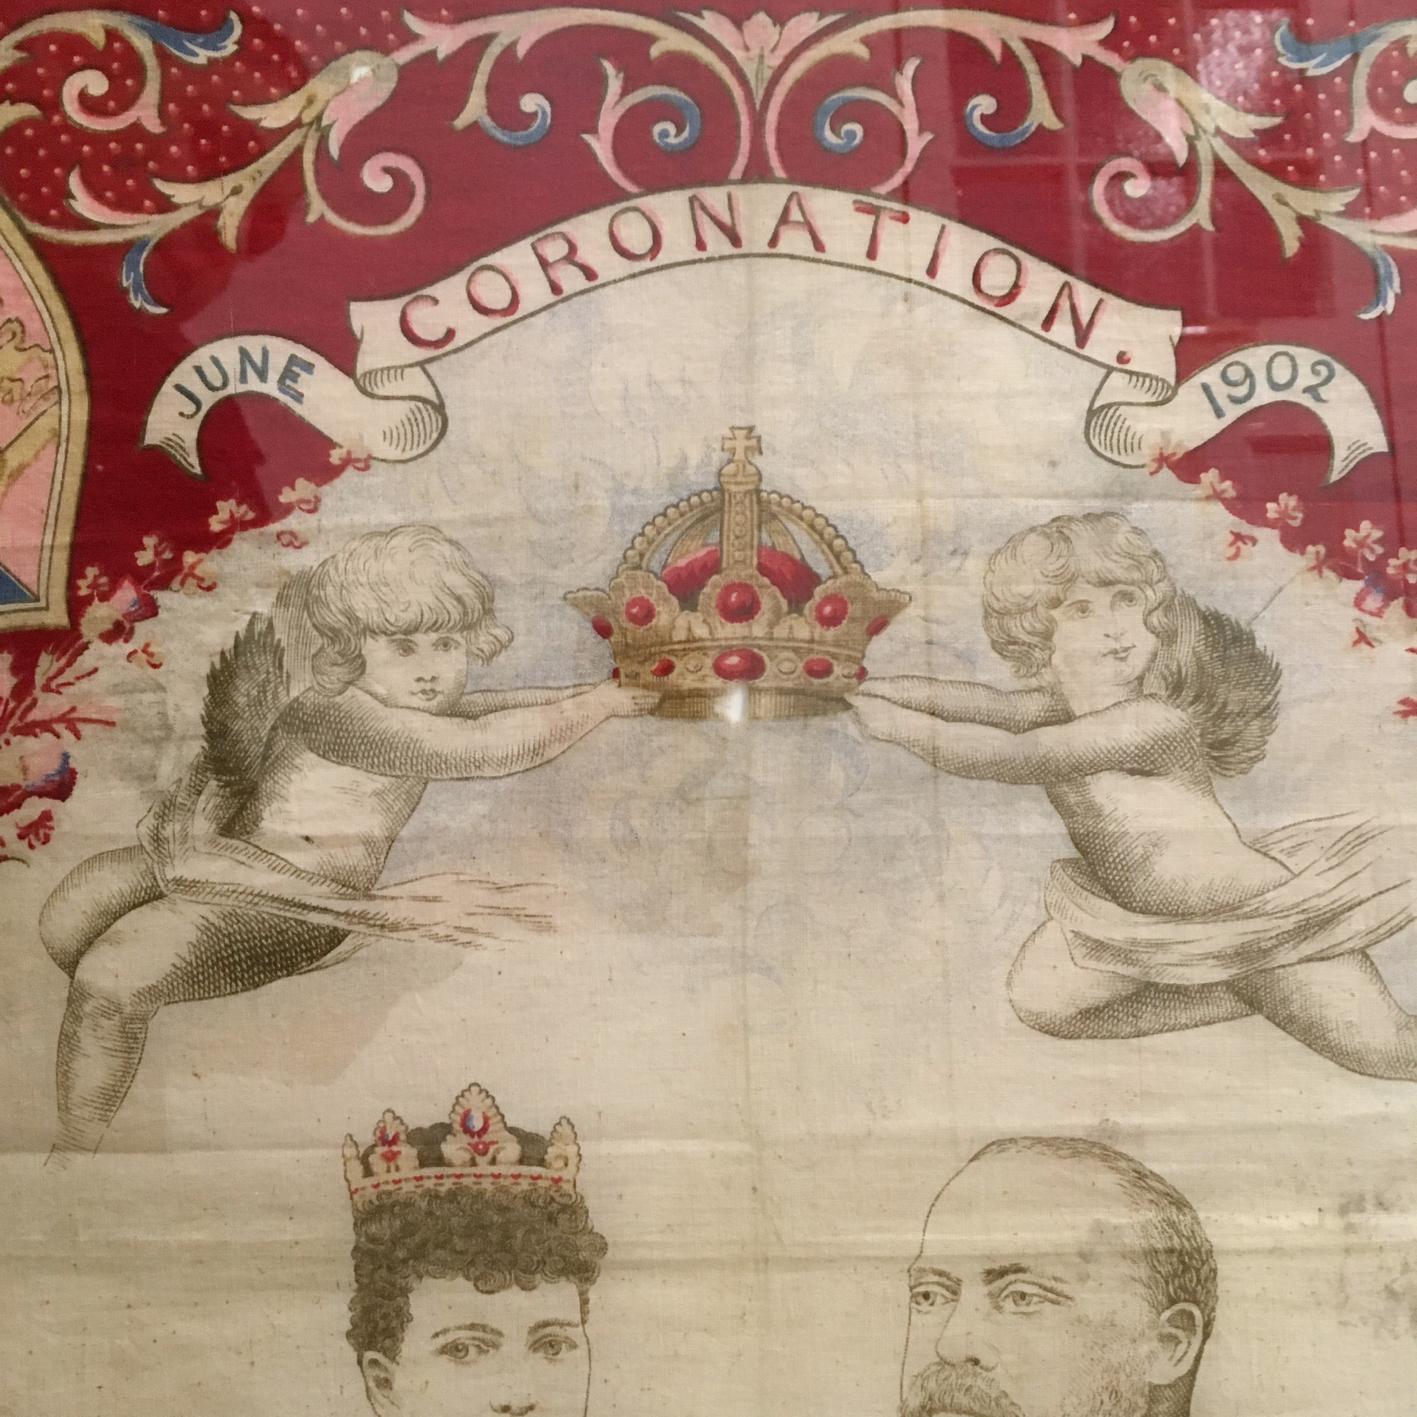 King Edward VII coronation, June 1902 framed scarf / flag.

This scarf is an original antique piece of British history and patriotic memorabilia.

This was made for the celebration of the Coronation in 1902.

There are age related signs of use